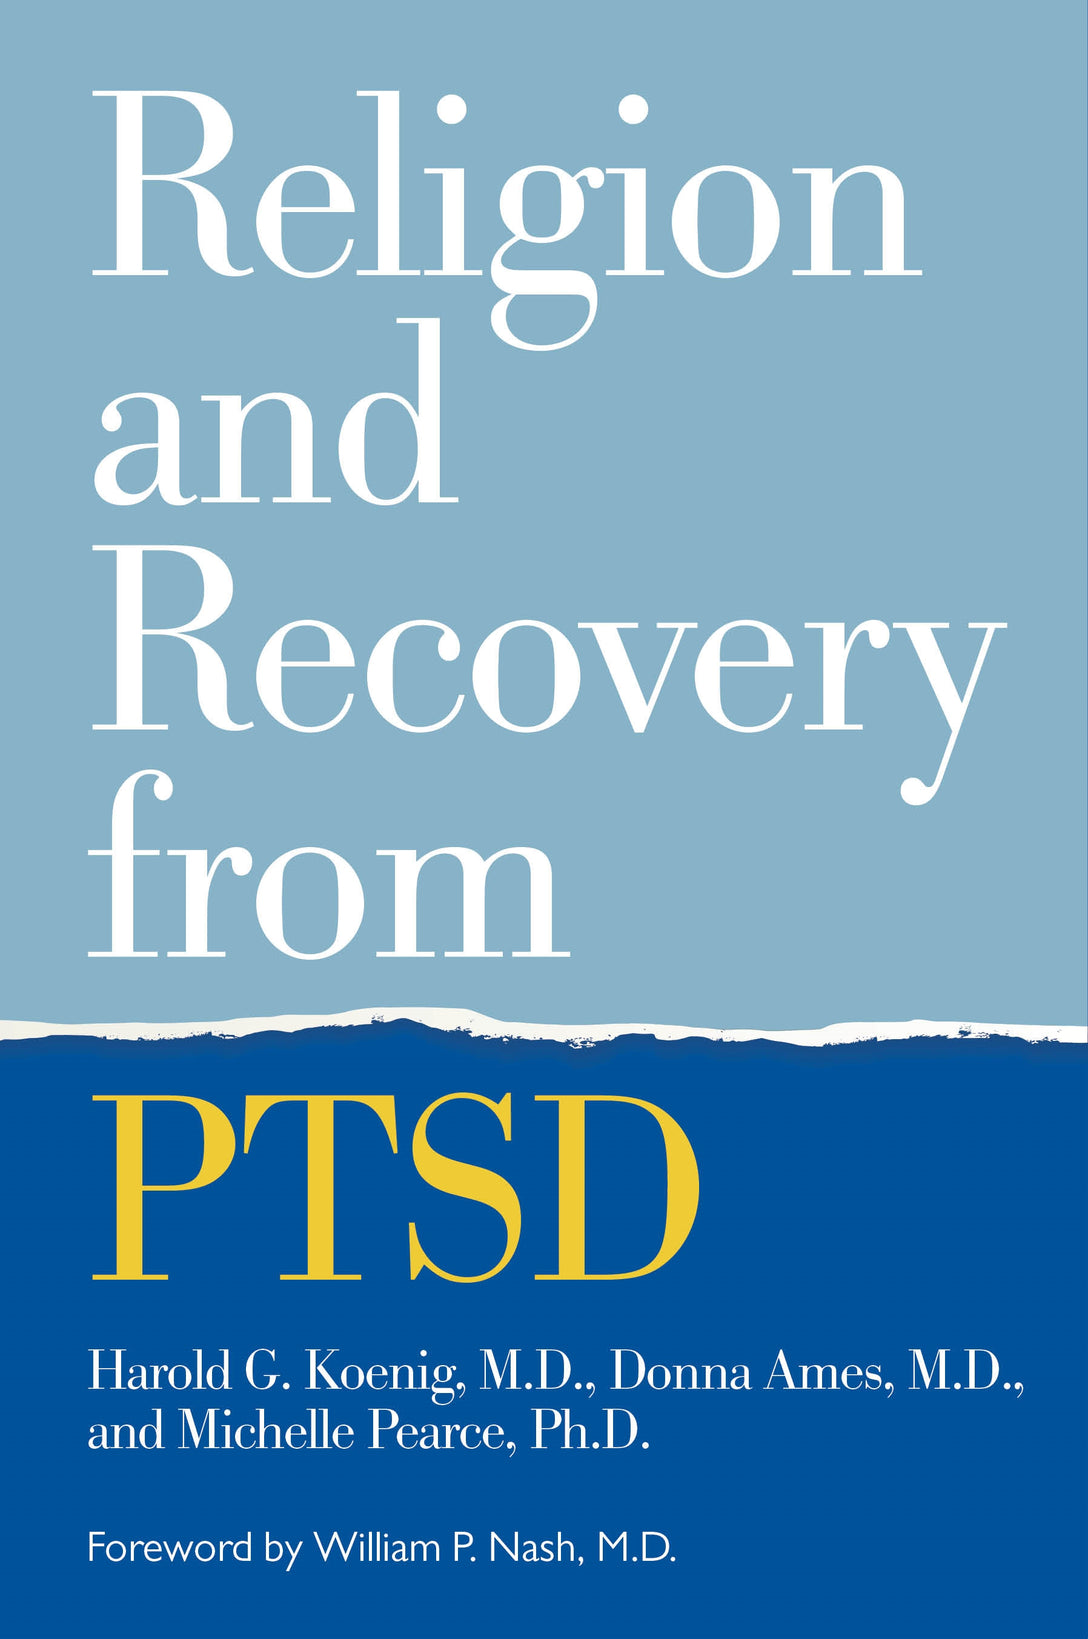 Religion and Recovery from PTSD by Harold Koenig, Donna Ames, Michelle Pearce, William Nash